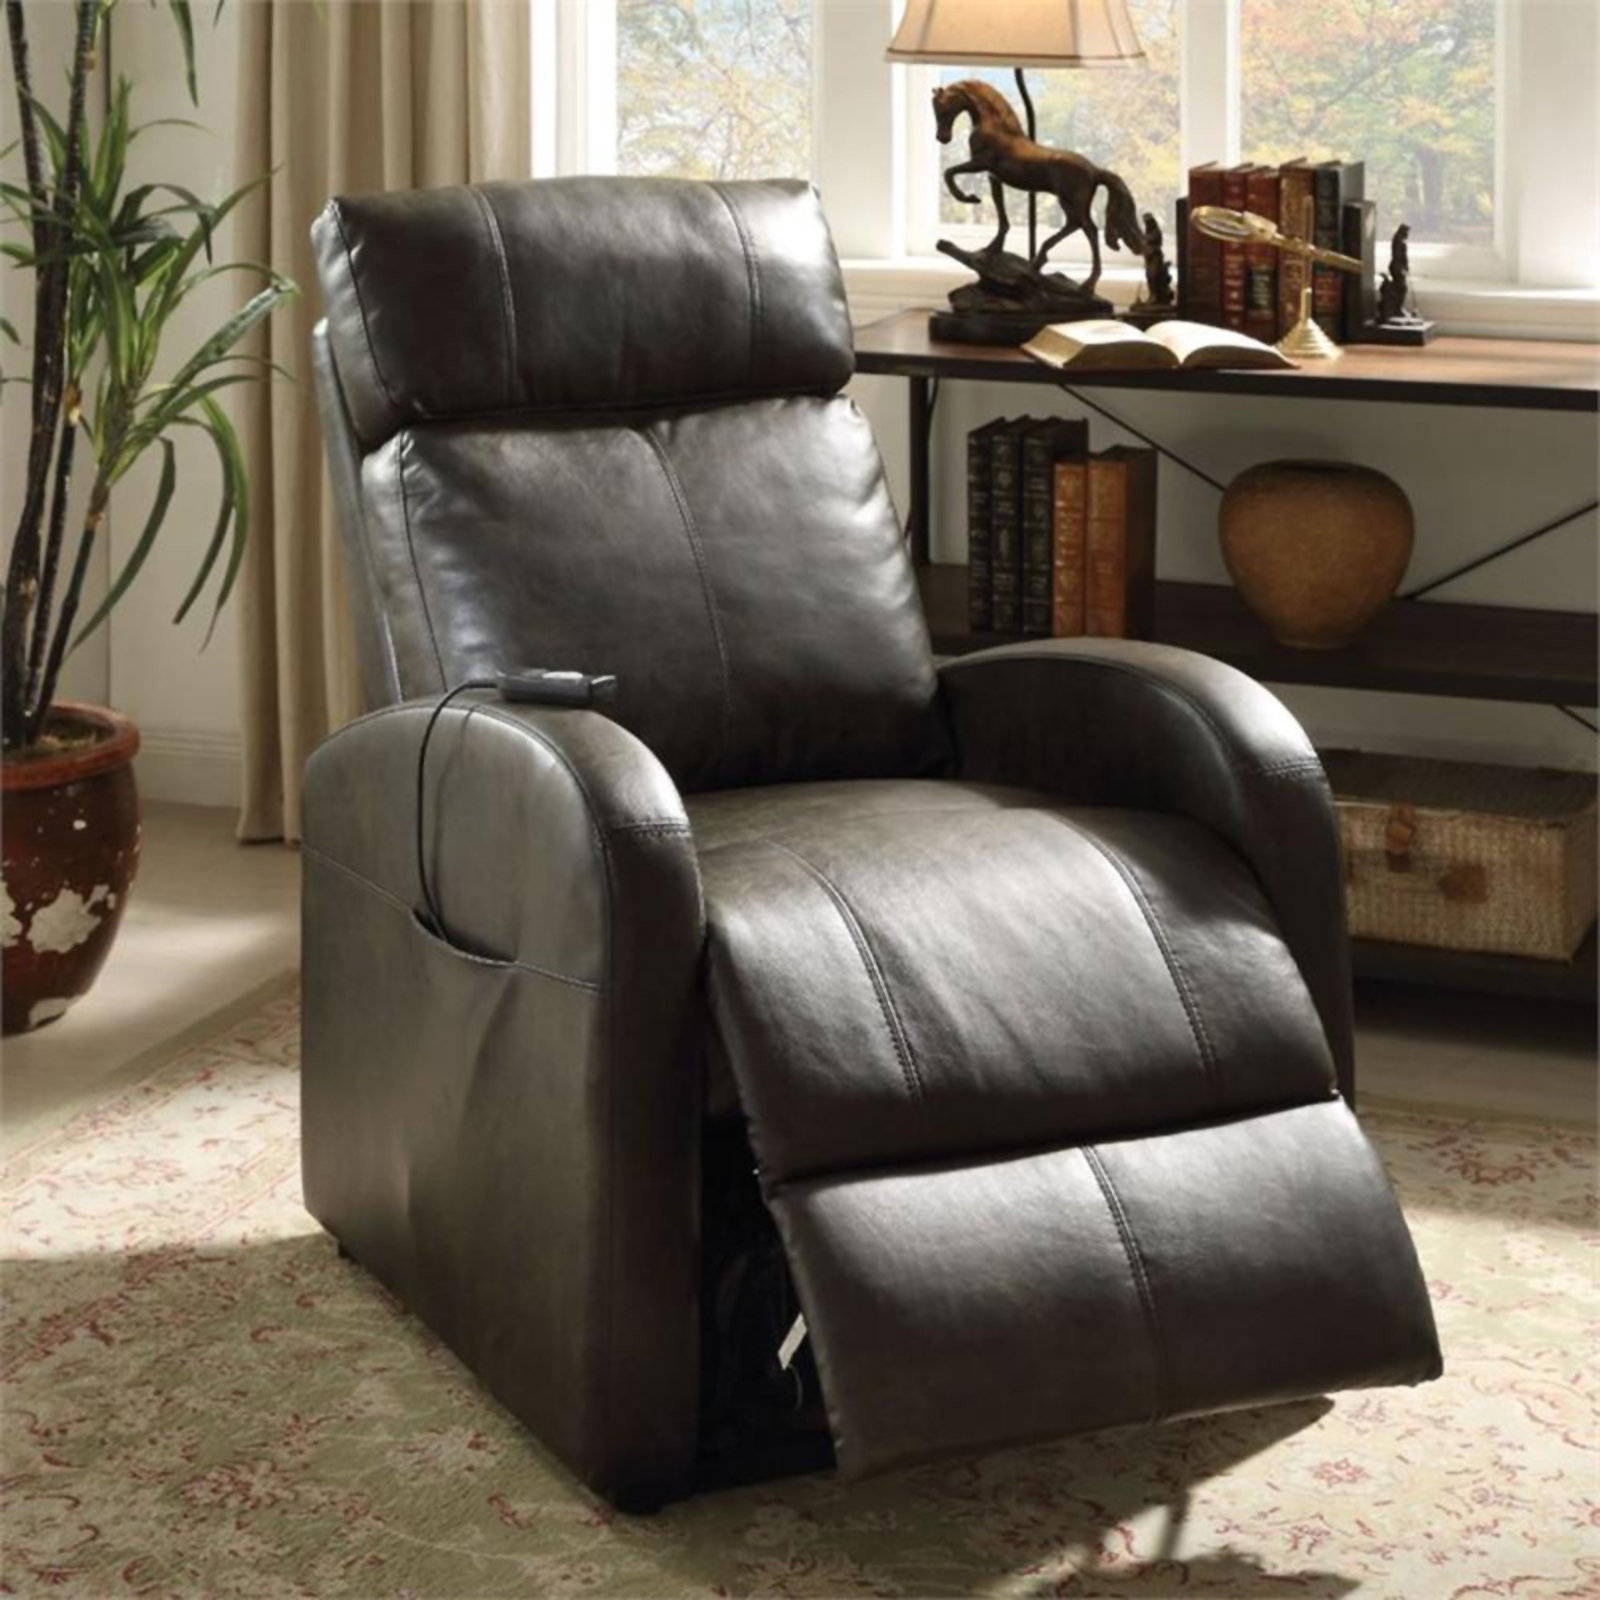 Acme Furniture Ricardo 40" Upholstered Recliner Chair with Power Lift - Dark Gray